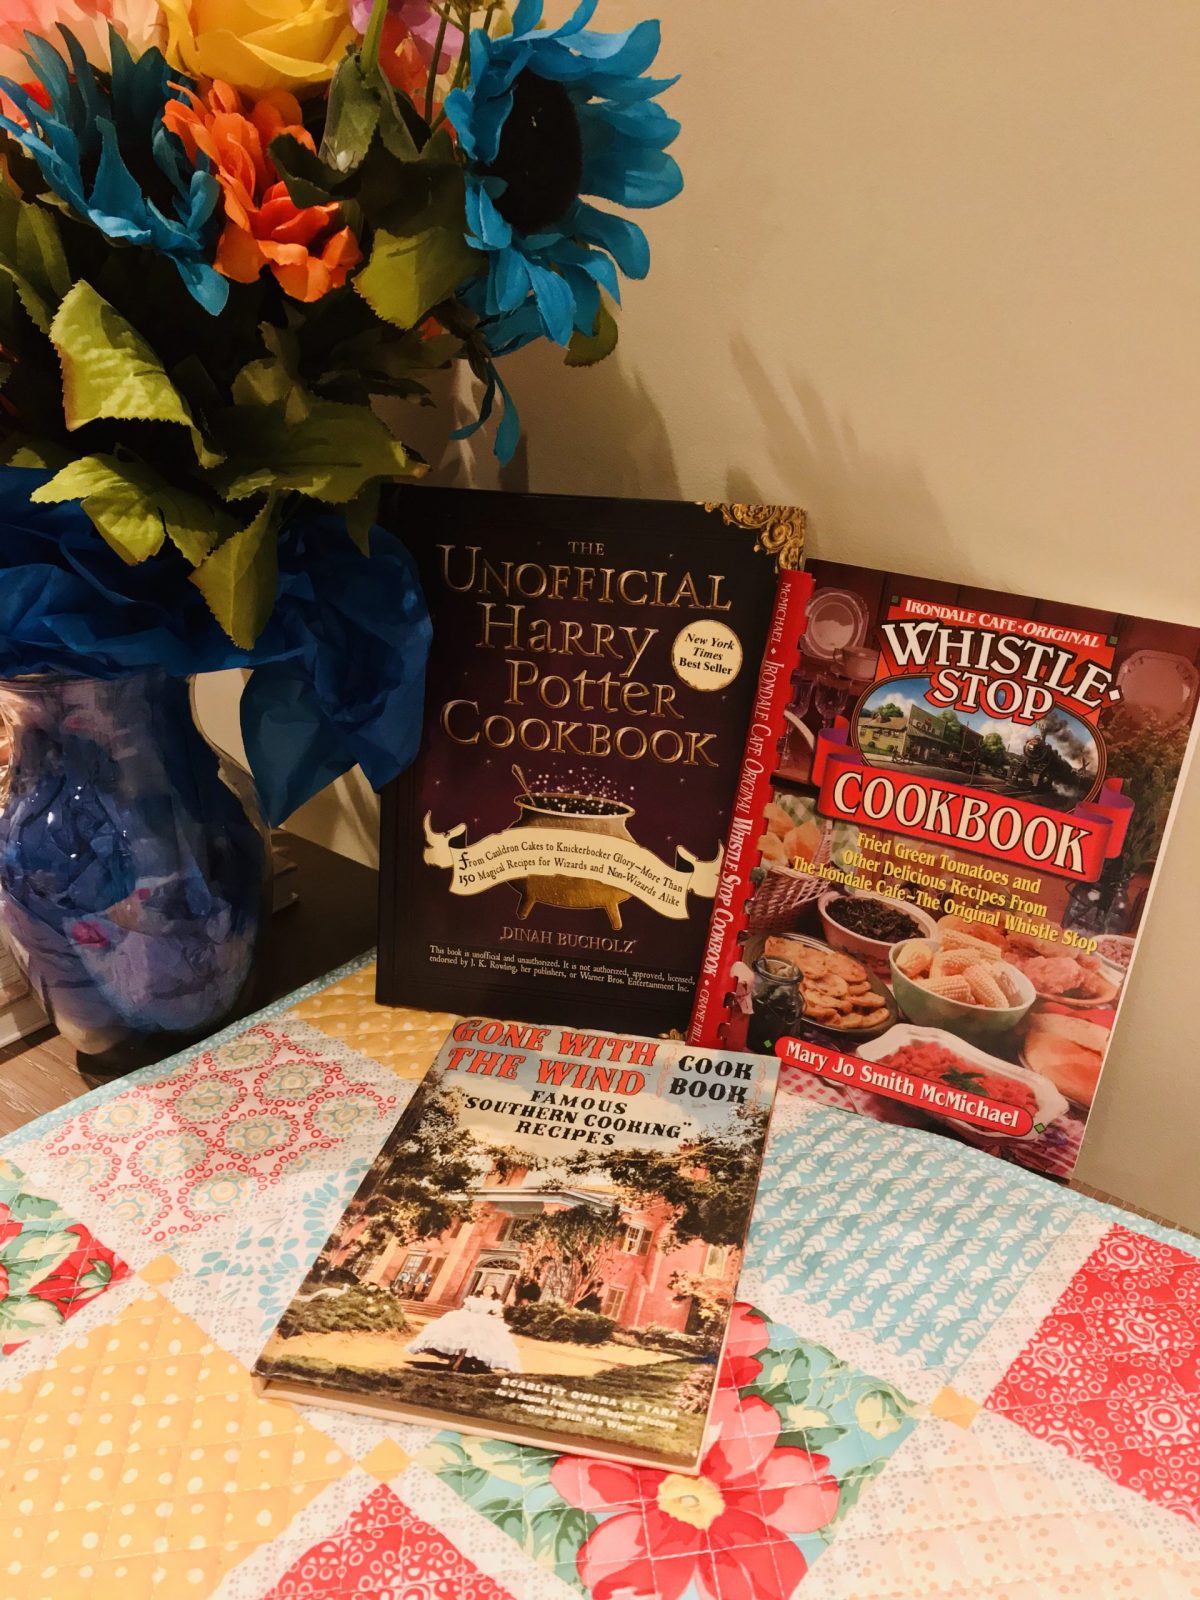 Photos of 3 of my themed cookbooks, against a backdrop of colorful place-mats and flowers.